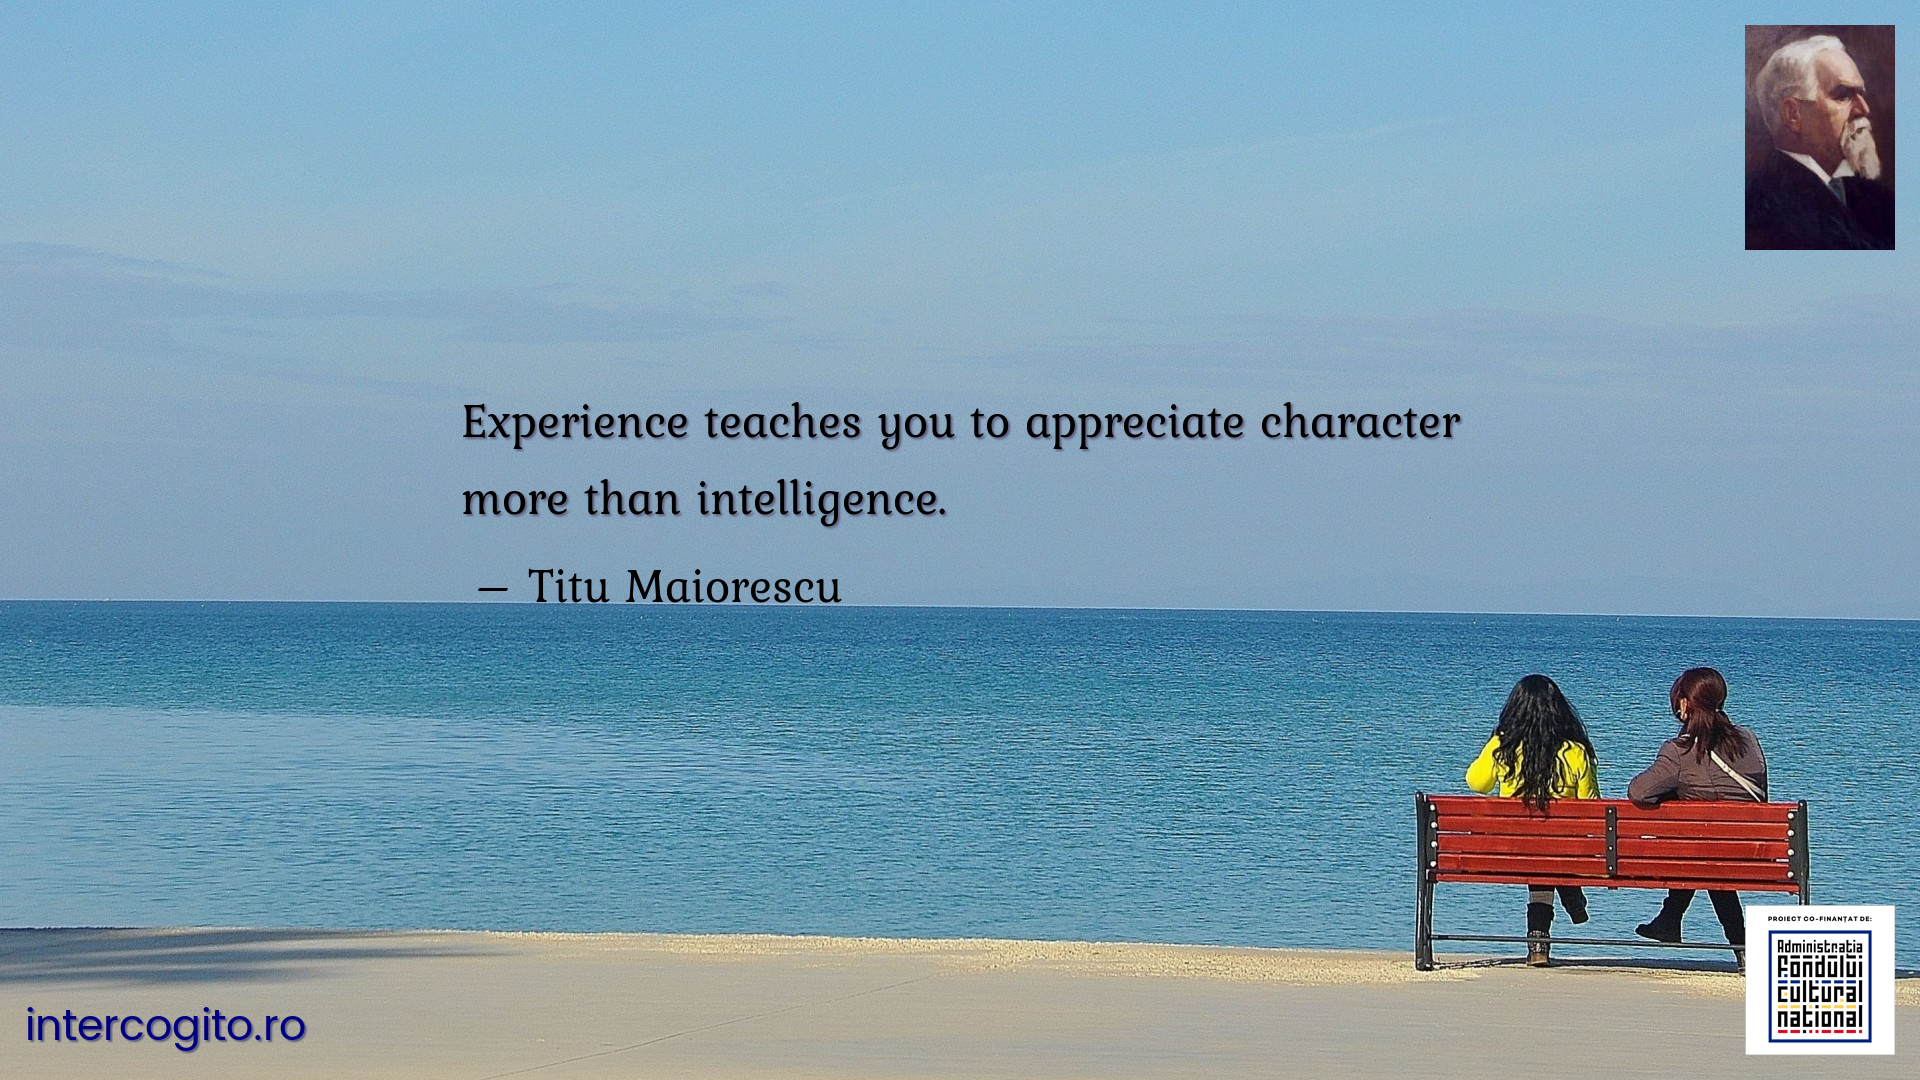 Experience teaches you to appreciate character more than intelligence.